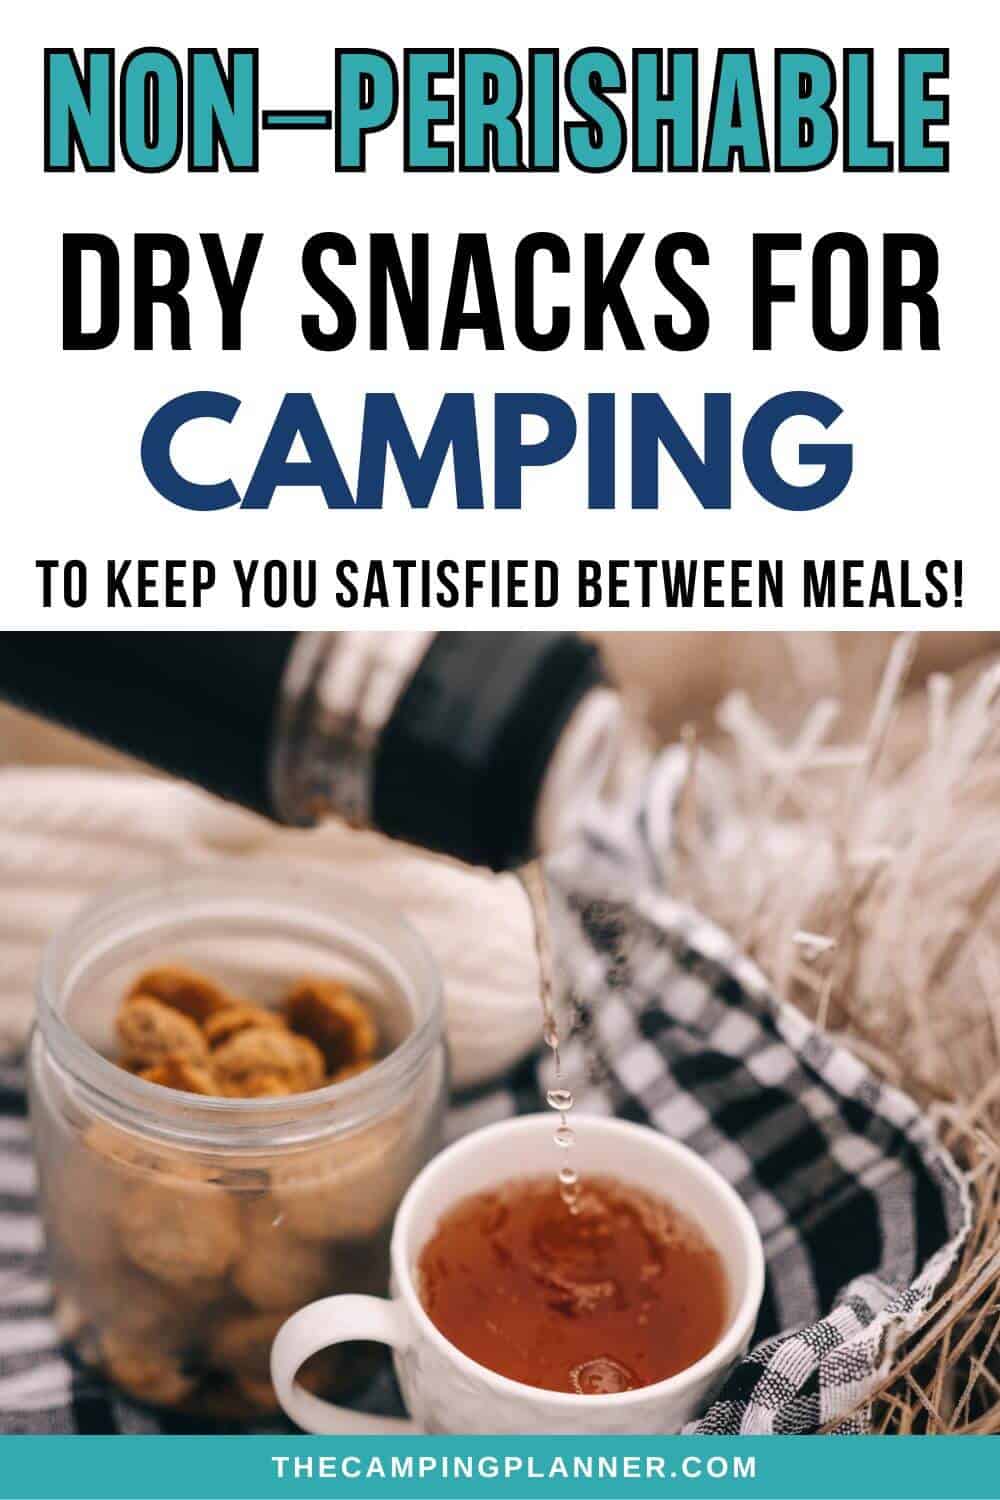 pinterest image - non-perishable dry snacks for camping to keep you satisfied between meals.